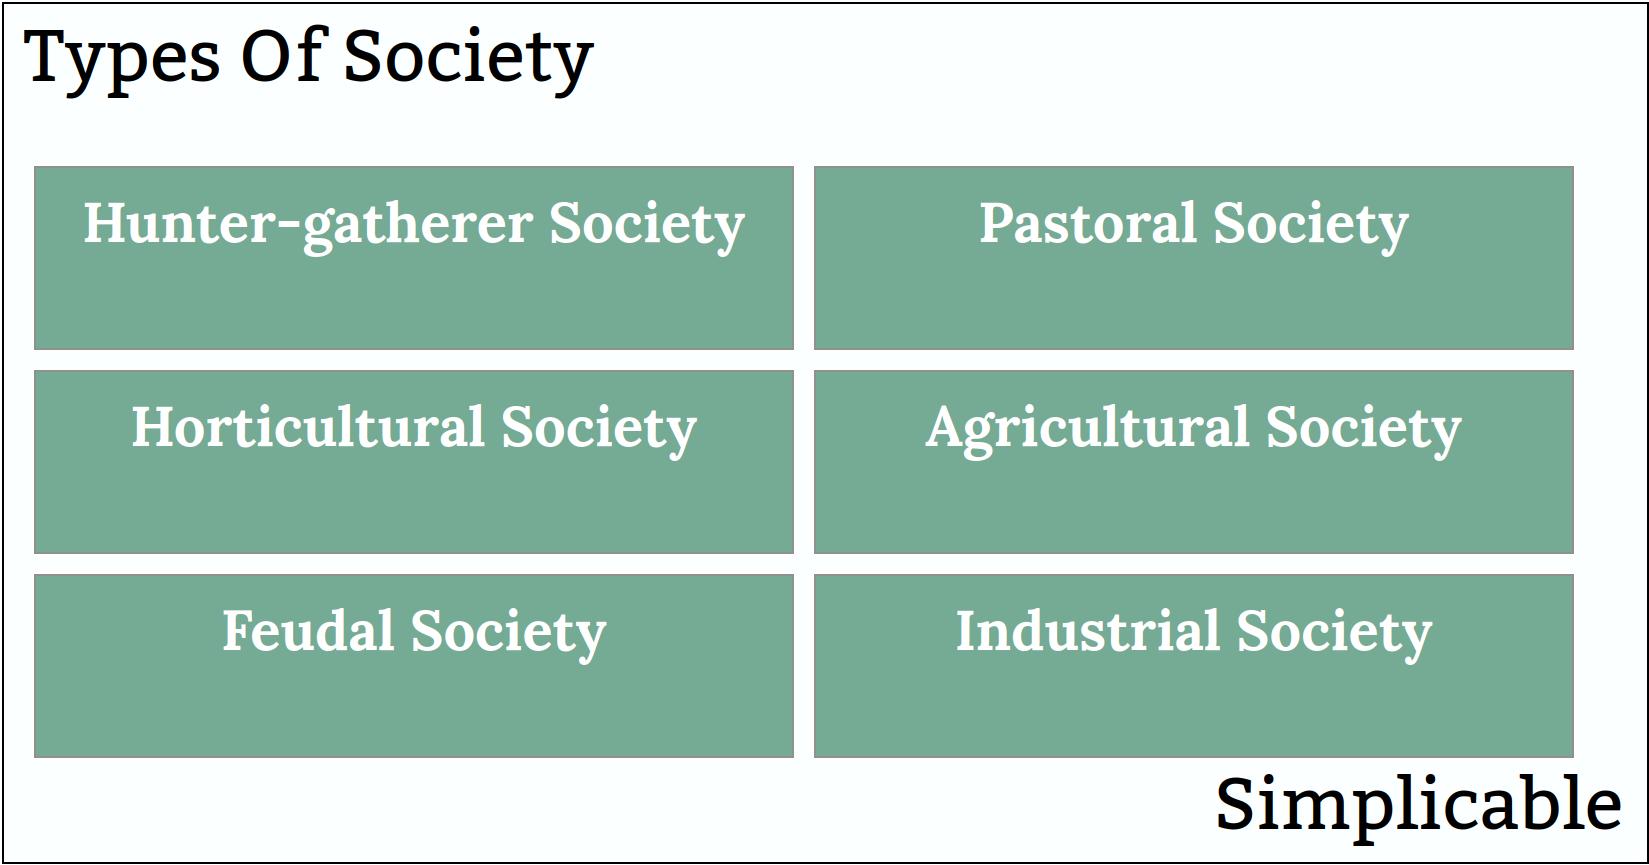 types of society simplicable